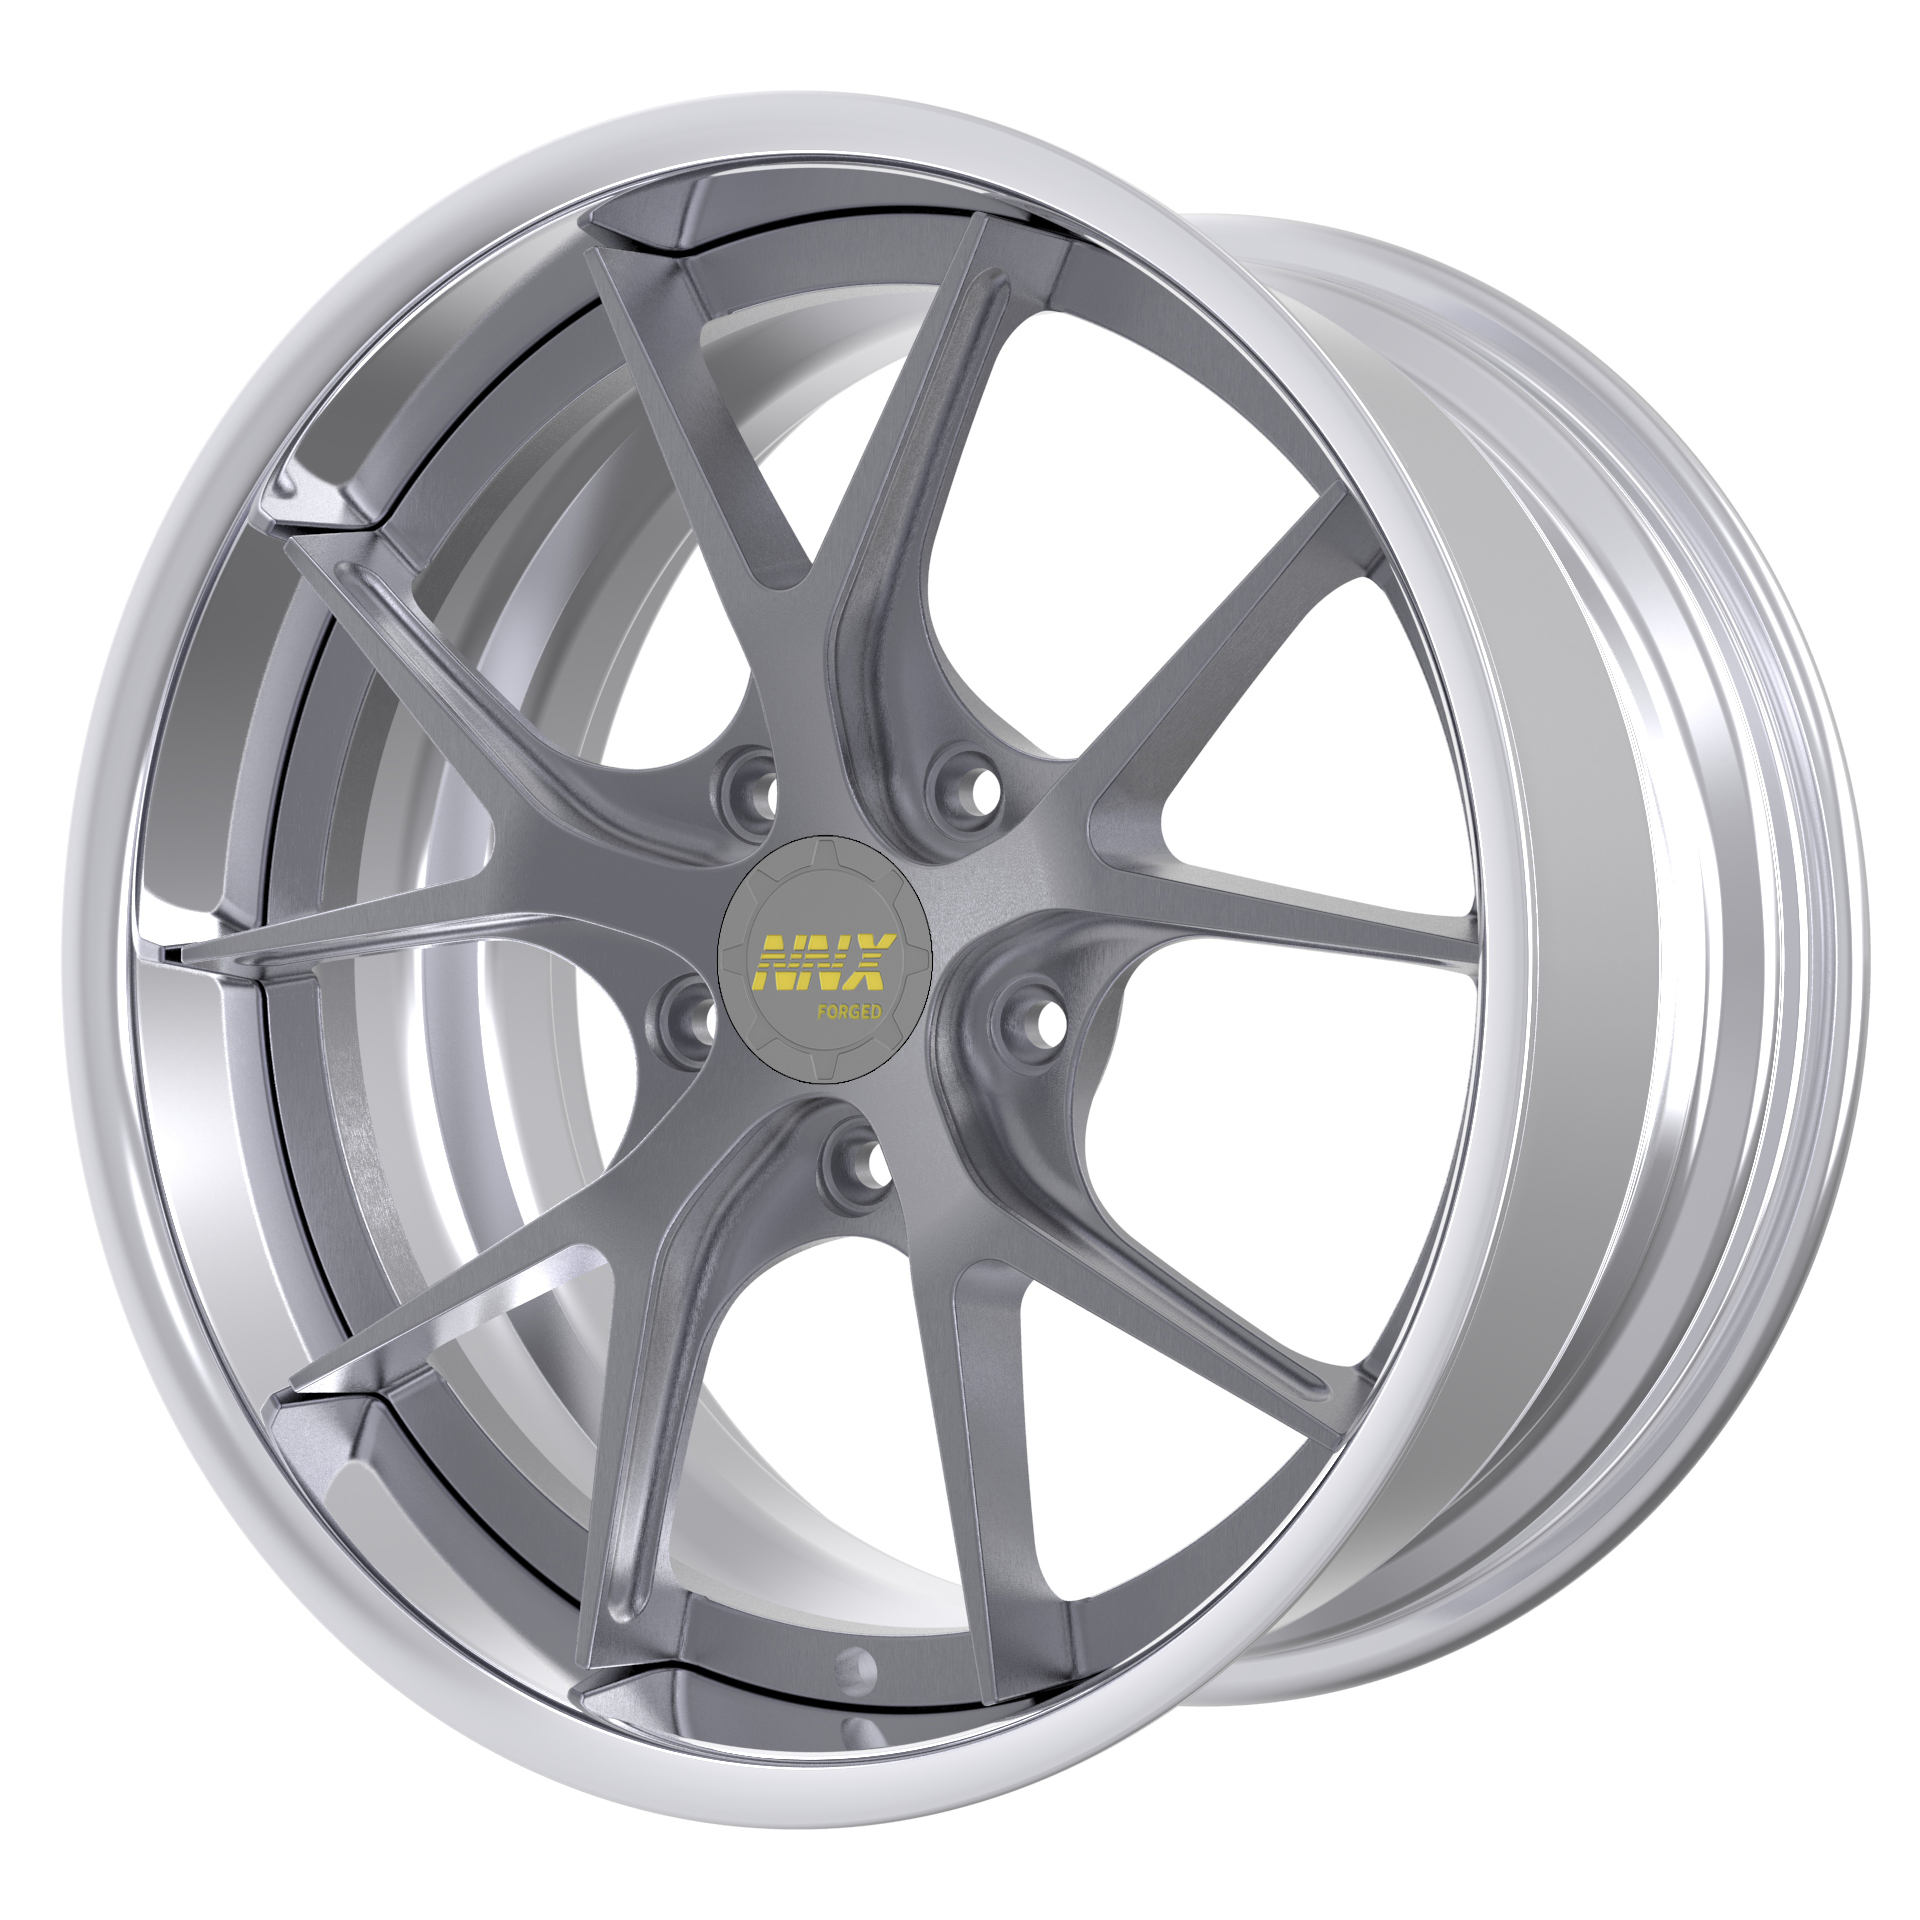 NNX-S139   2 Pieces Forged Car Wheels For T6061 Step Rim 5X112/120/114.3 Light Weight 18 19 20 21 22 23 Inch Wheel